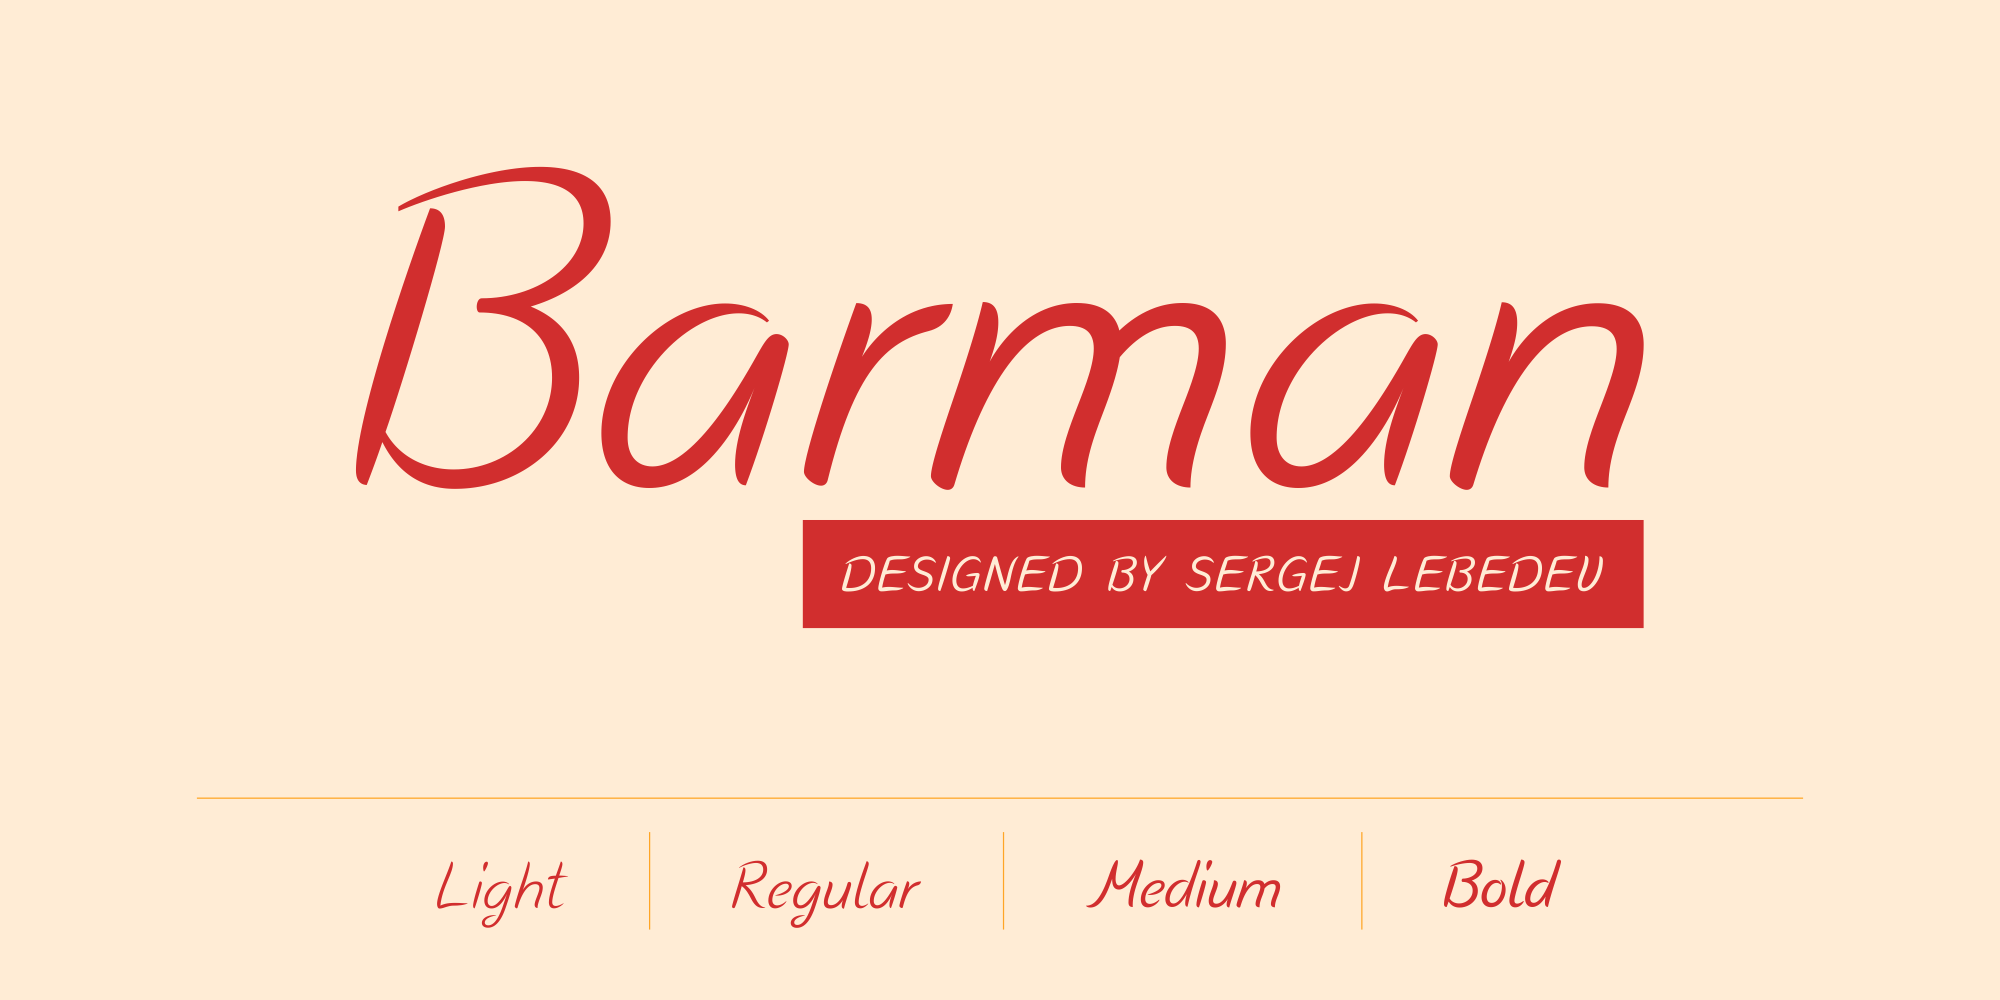 Barman is a modern, contemporary script typeface. It is handmade by Sergej Lebedev and works perfectly for graphic design, logotypes, posters and product design.